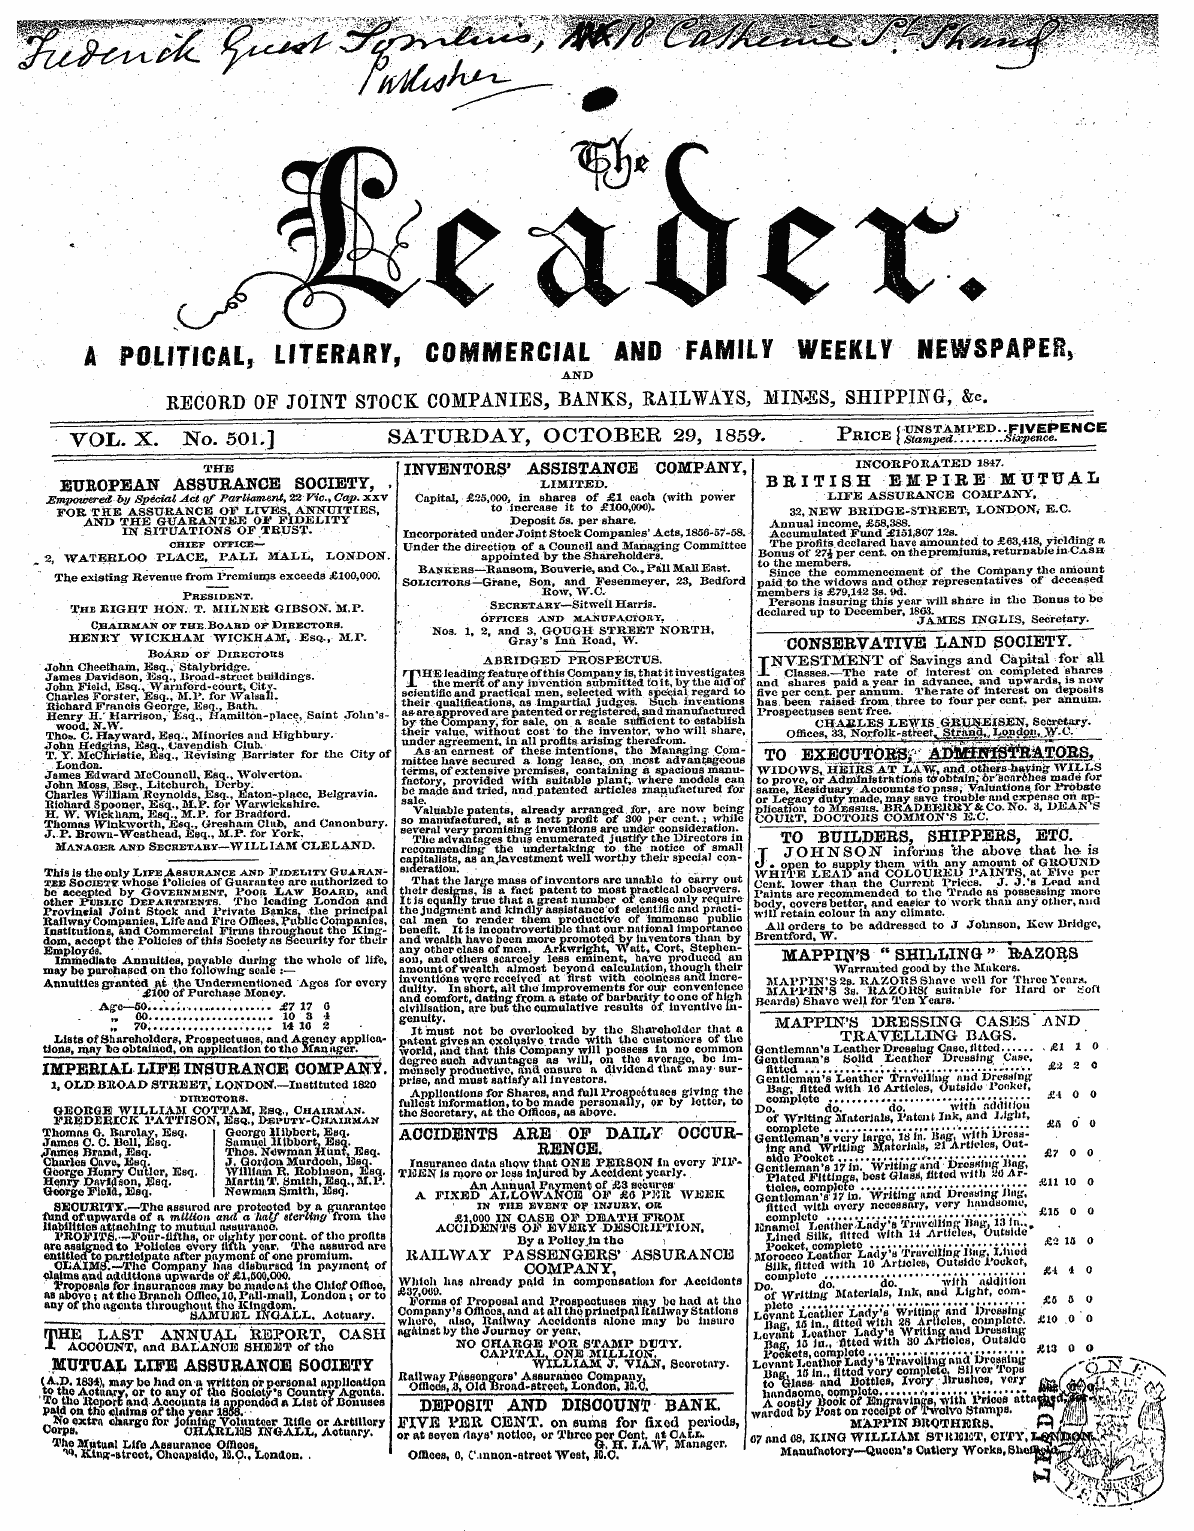 Leader (1850-1860): jS F Y, 2nd edition - Ad00113